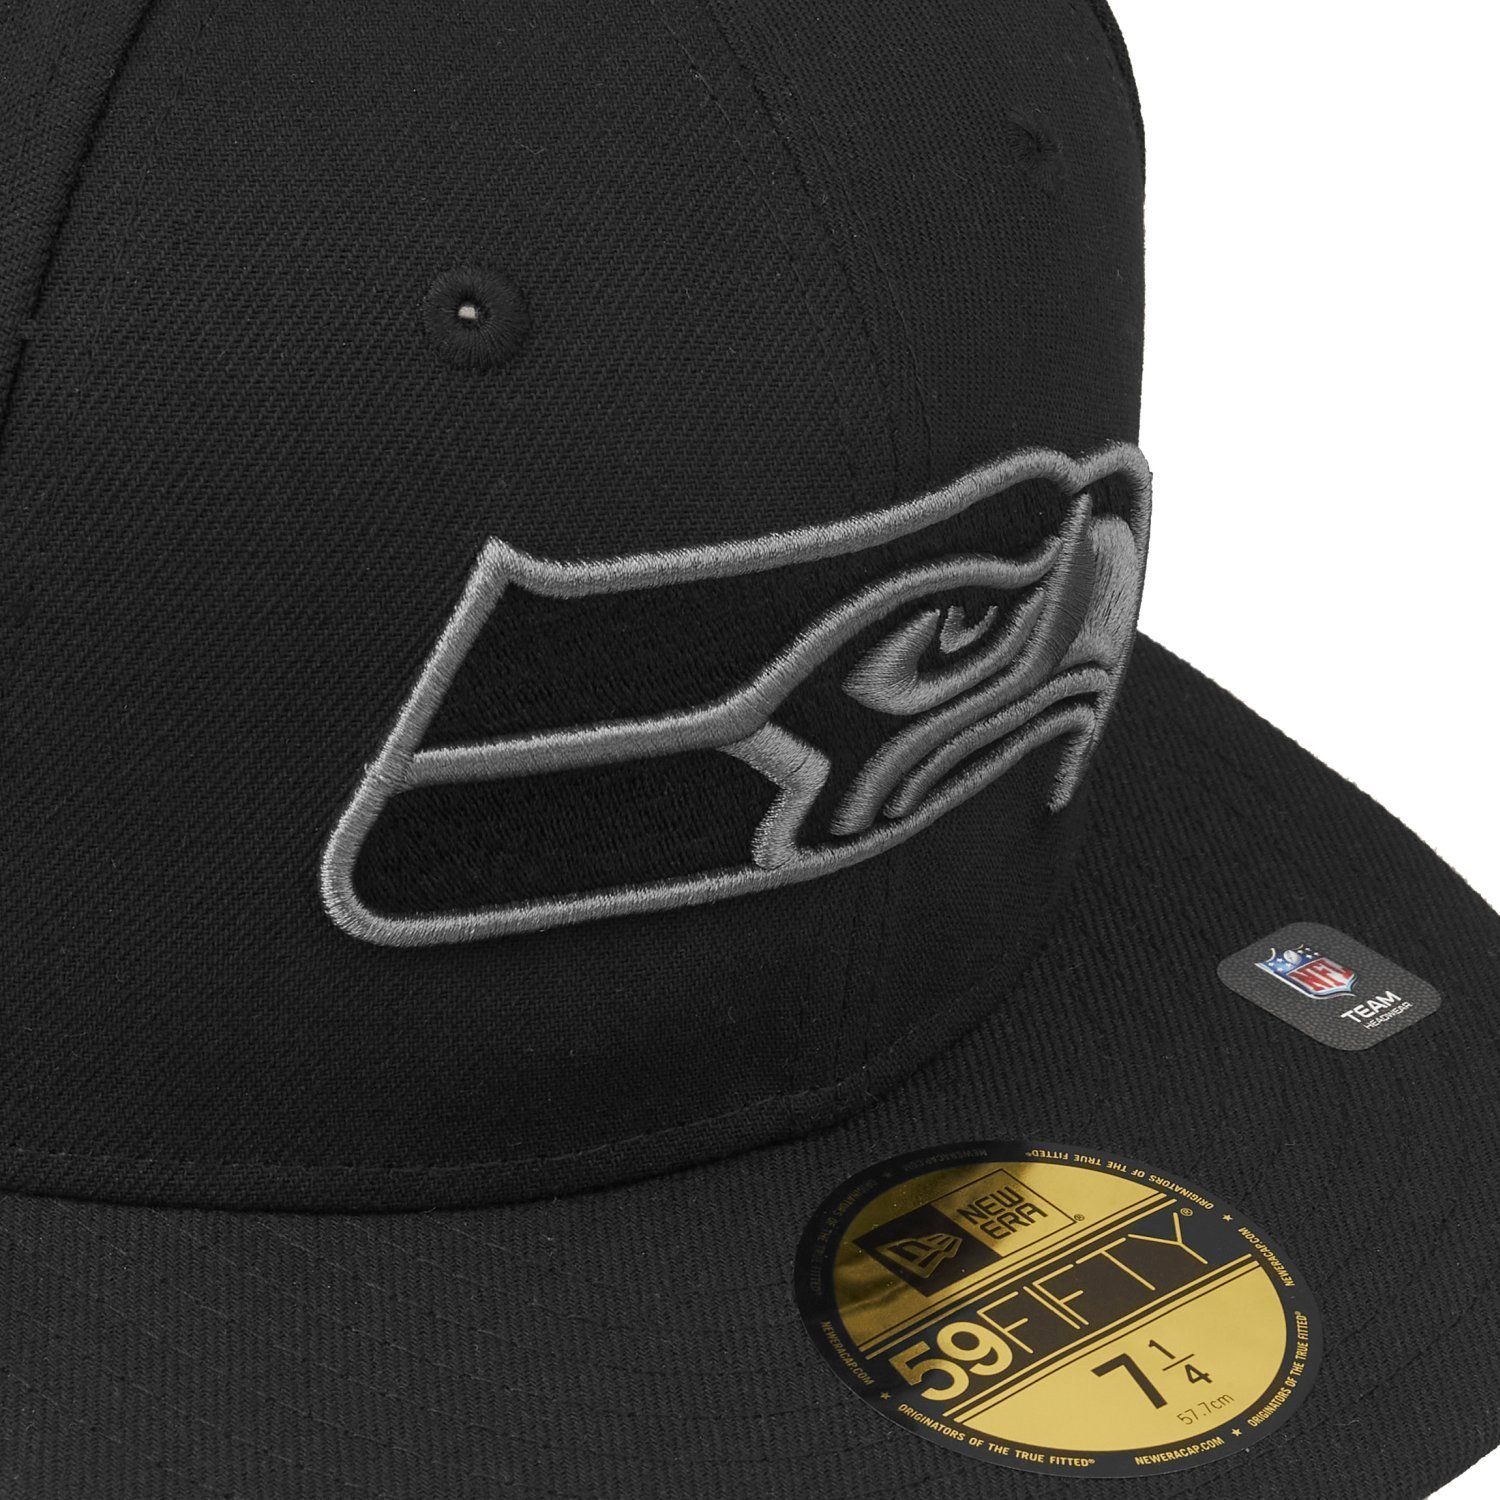 Seahawks 59Fifty TEAMS Fitted Era Cap New Seattle NFL